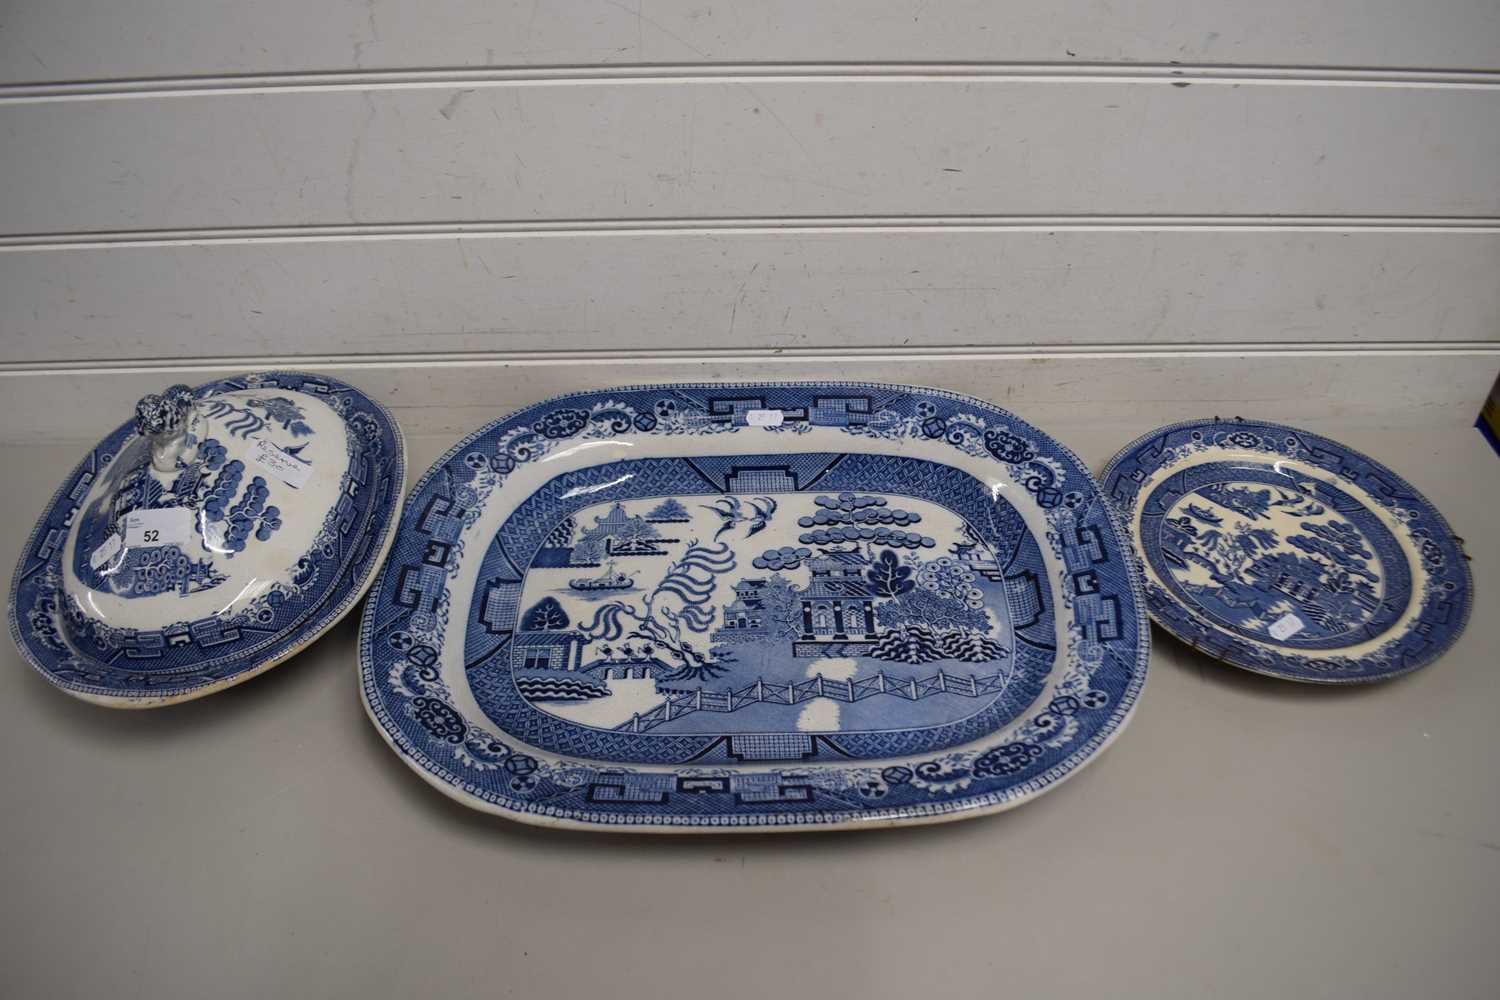 BLUE AND WHITE WILLOW PATTERN TUREEN AND COVER, LATE 19TH CENTURY, TOGETHER WITH A SIMILAR PLATE AND